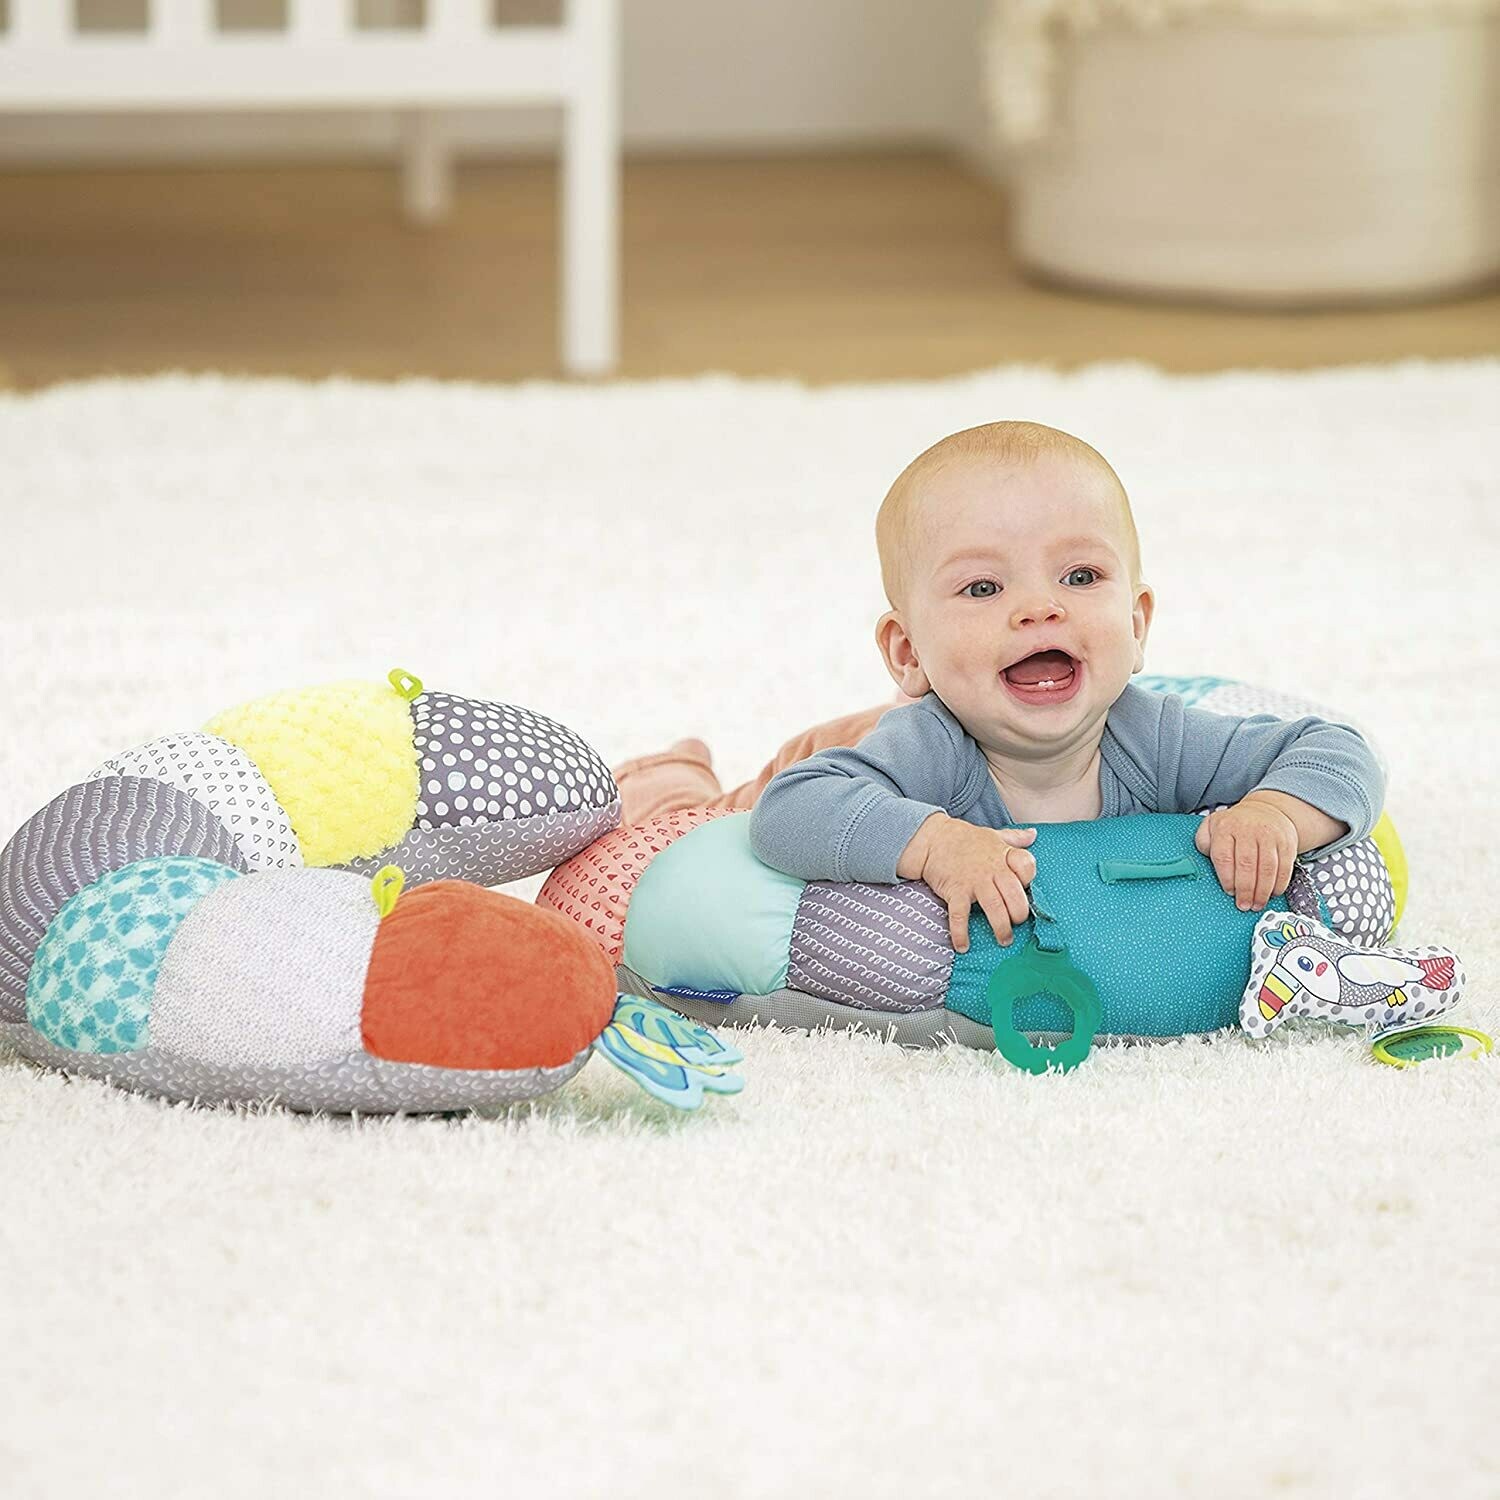 2 in 1 Tummy Time & Seated Support